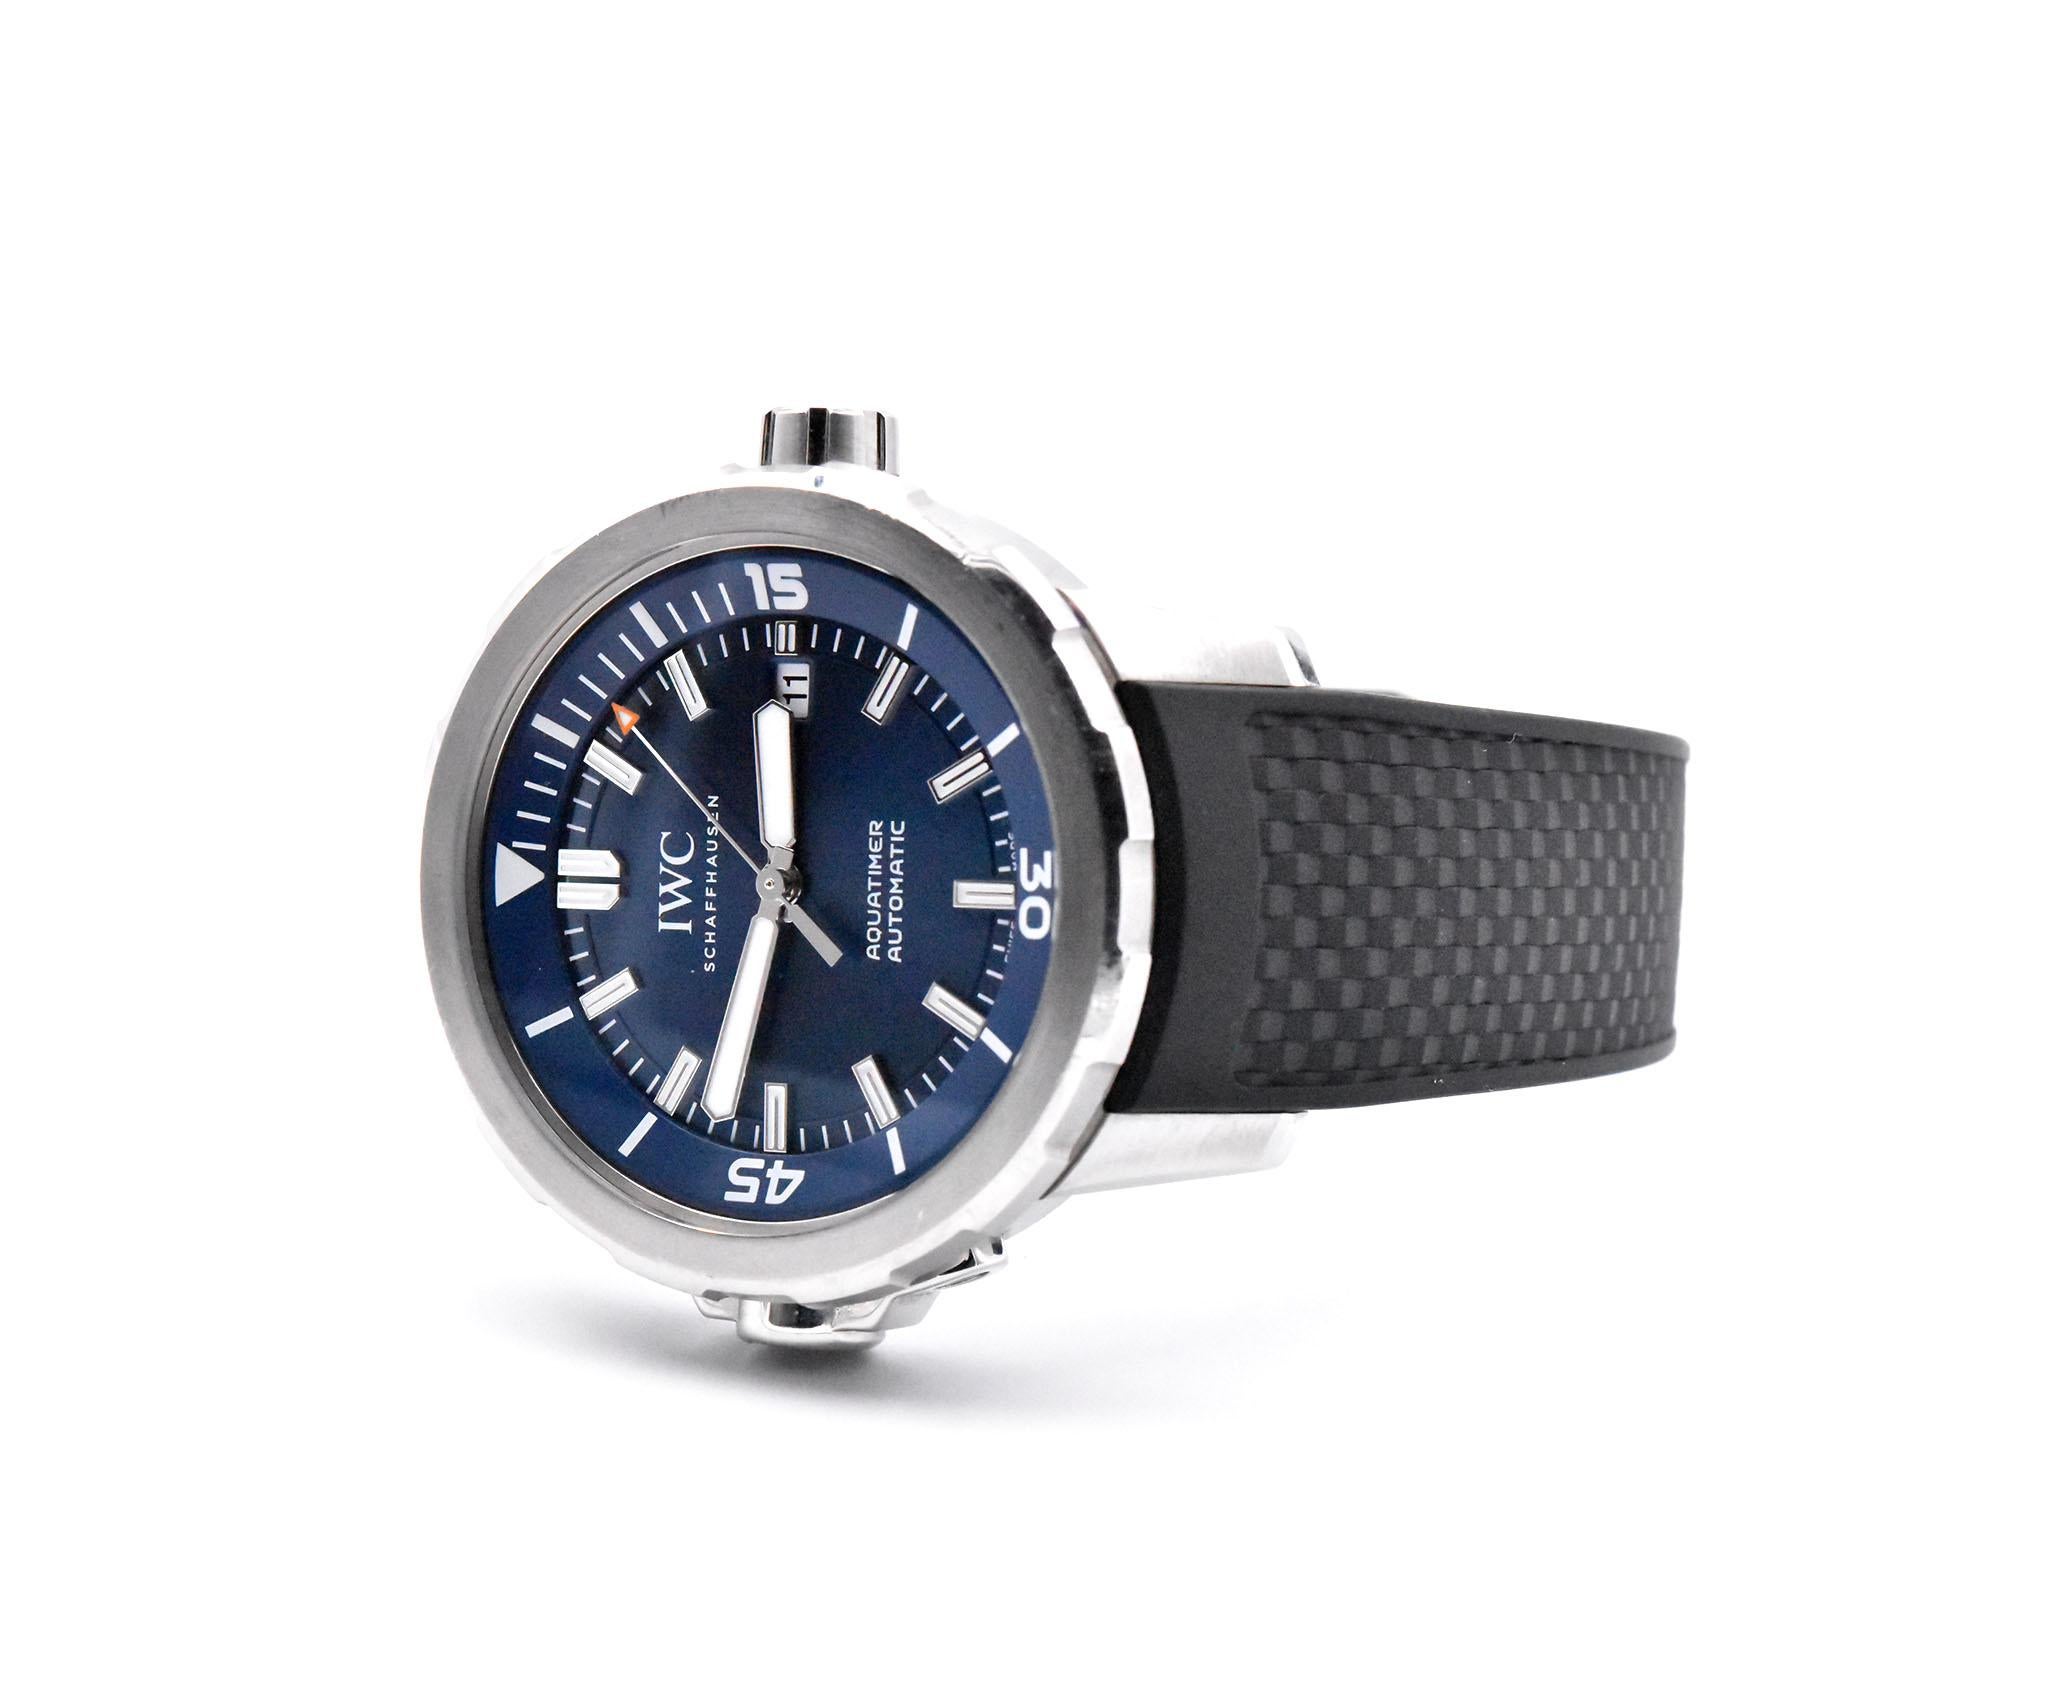 IWC Aquatimer Blue Expedition Jacques-Yves Cousteau Watch Ref. IW329005 In Excellent Condition In Scottsdale, AZ